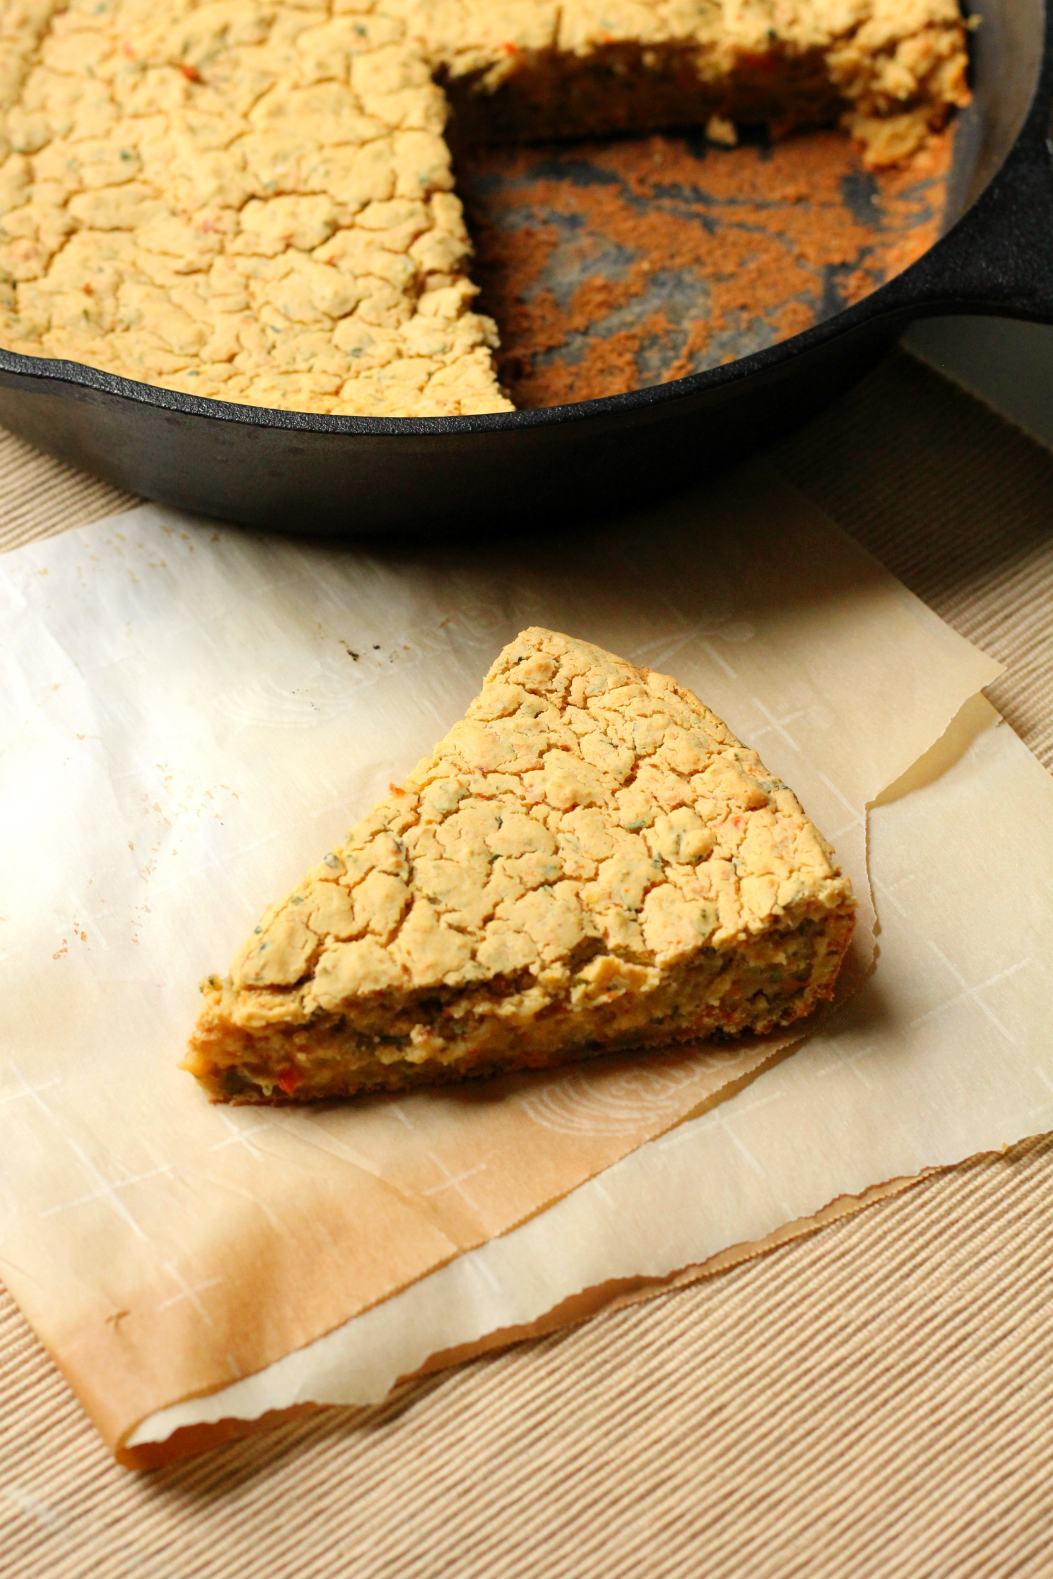 Syrian Red Lentil Skillet Bread | Strength and Sunshine @RebeccaGF666 A Syrian-inspired red lentil skillet bread, bursting with flavorful spices, herbs, and roasted red pepper. Gluten-free, grain-free, and vegan, this easy lentil skillet bread will wow your guests and make dinner memorable.